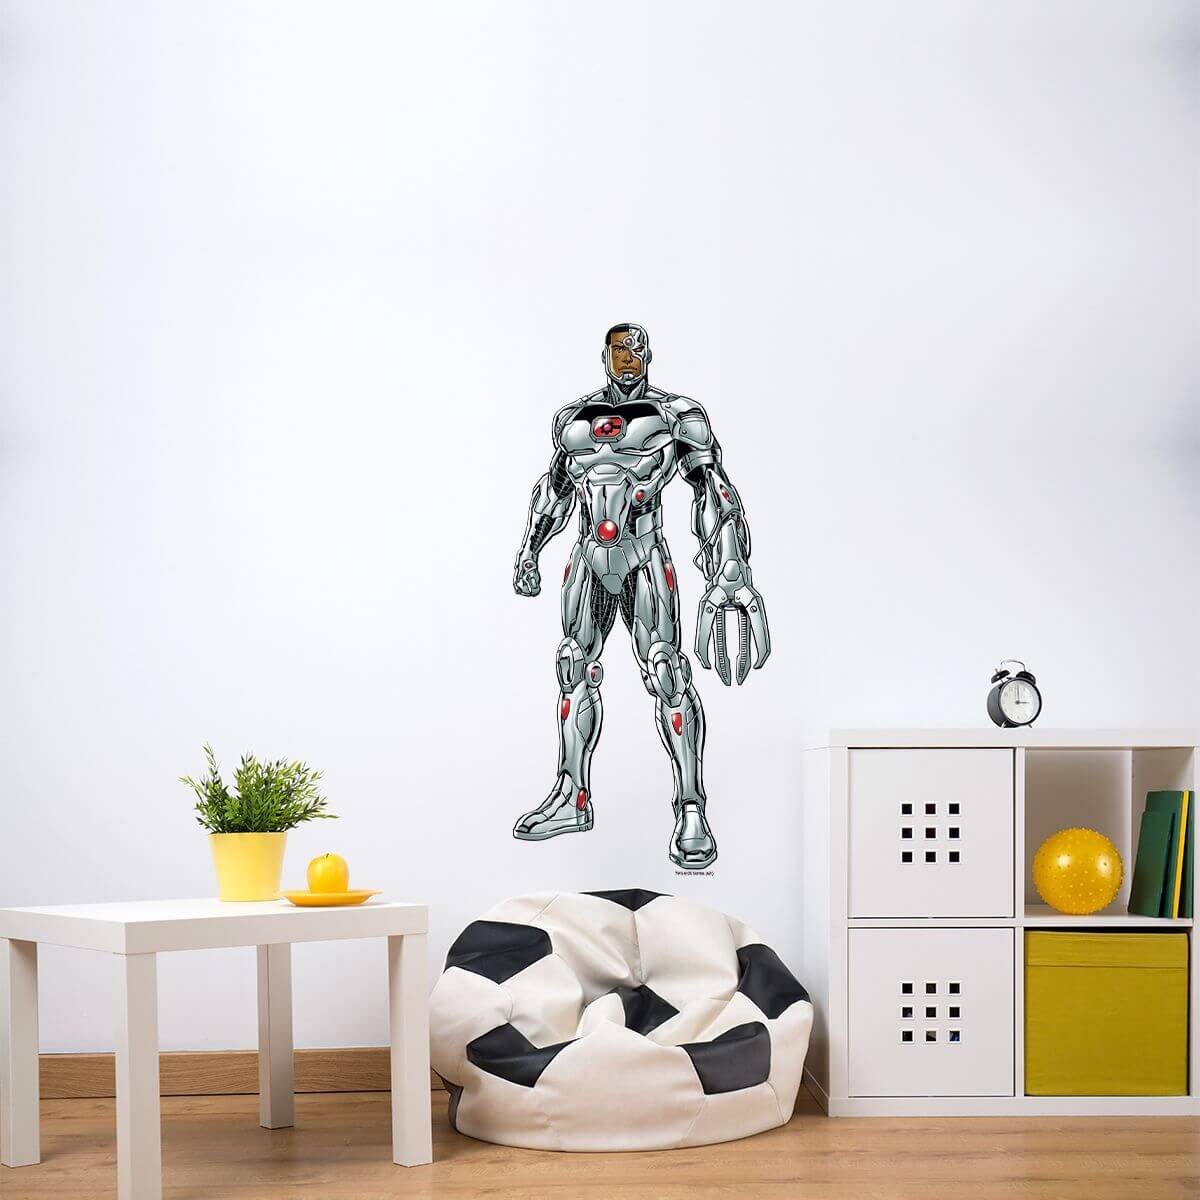 Kismet Decals Cyborg Victorious Licensed Wall Sticker - Easy DIY Justice League Home & Room Decor Wall Art - Kismet Decals